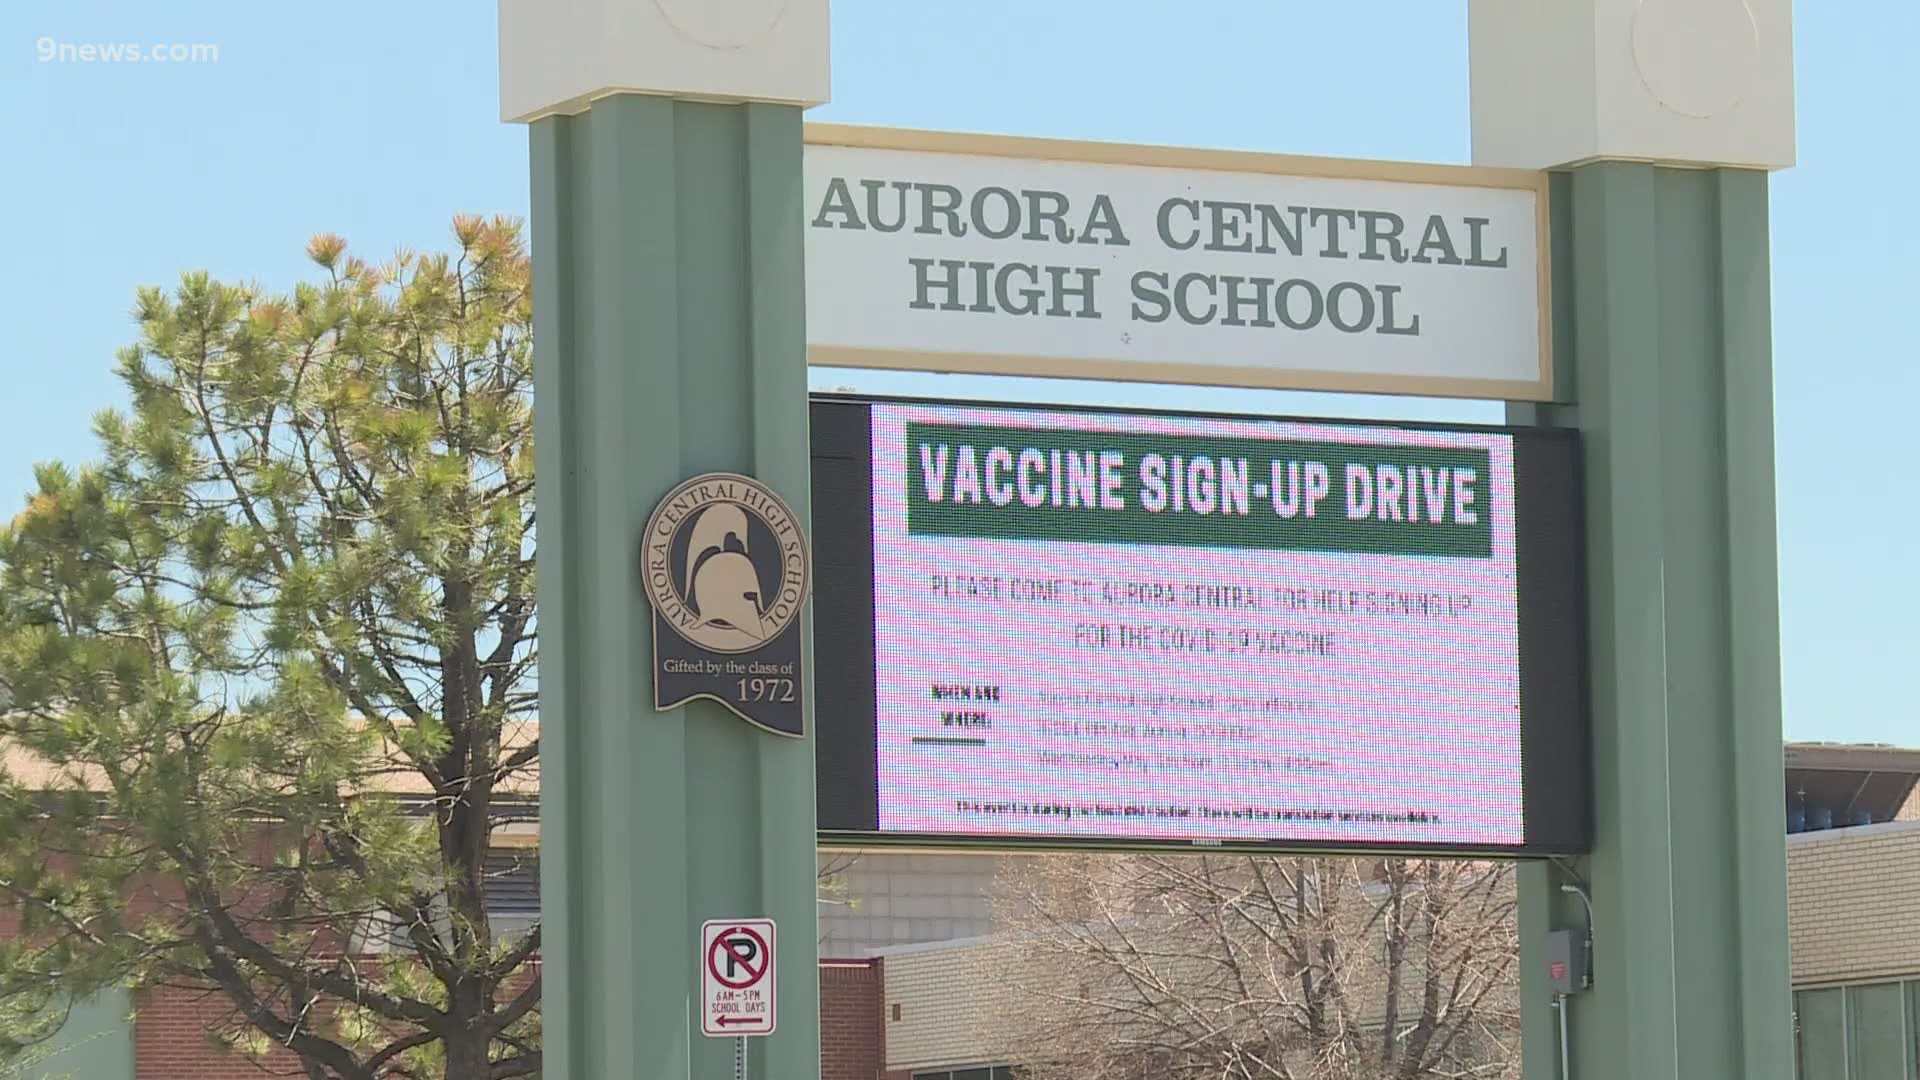 APS has become the first metro Denver school district to require COVID-19 vaccinations for staff during the upcoming school year.